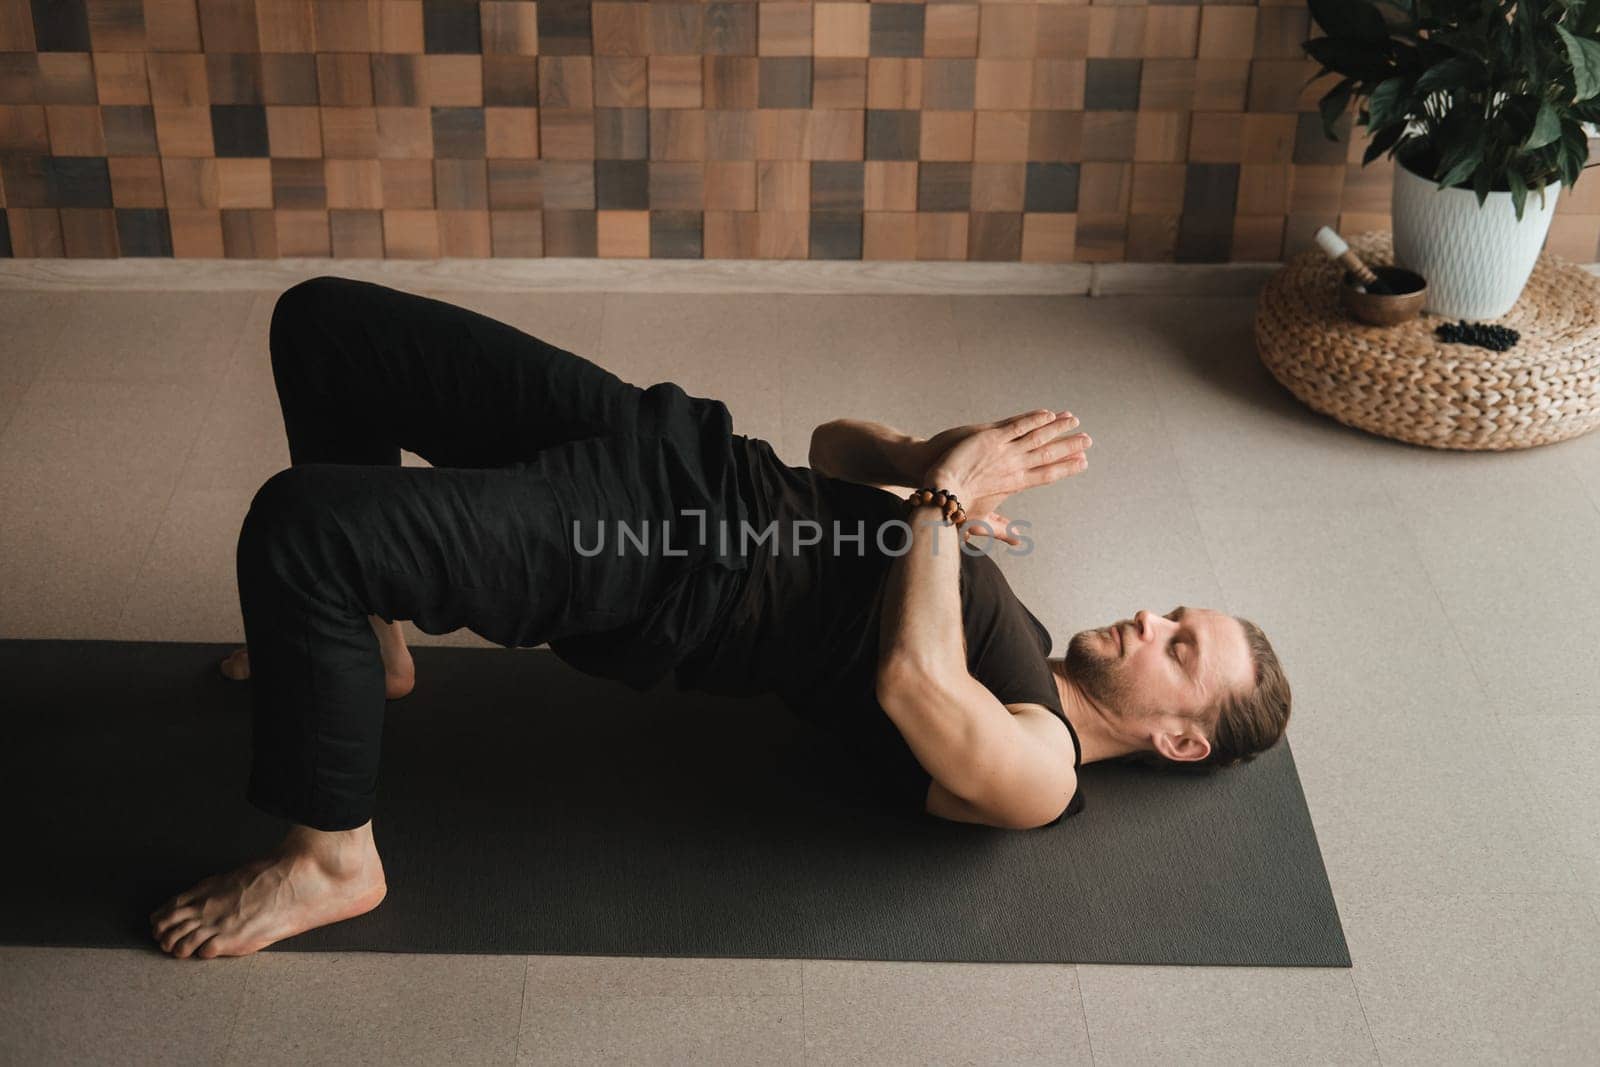 A man performing gymnastic exercises on a yoga mat at home by Lobachad